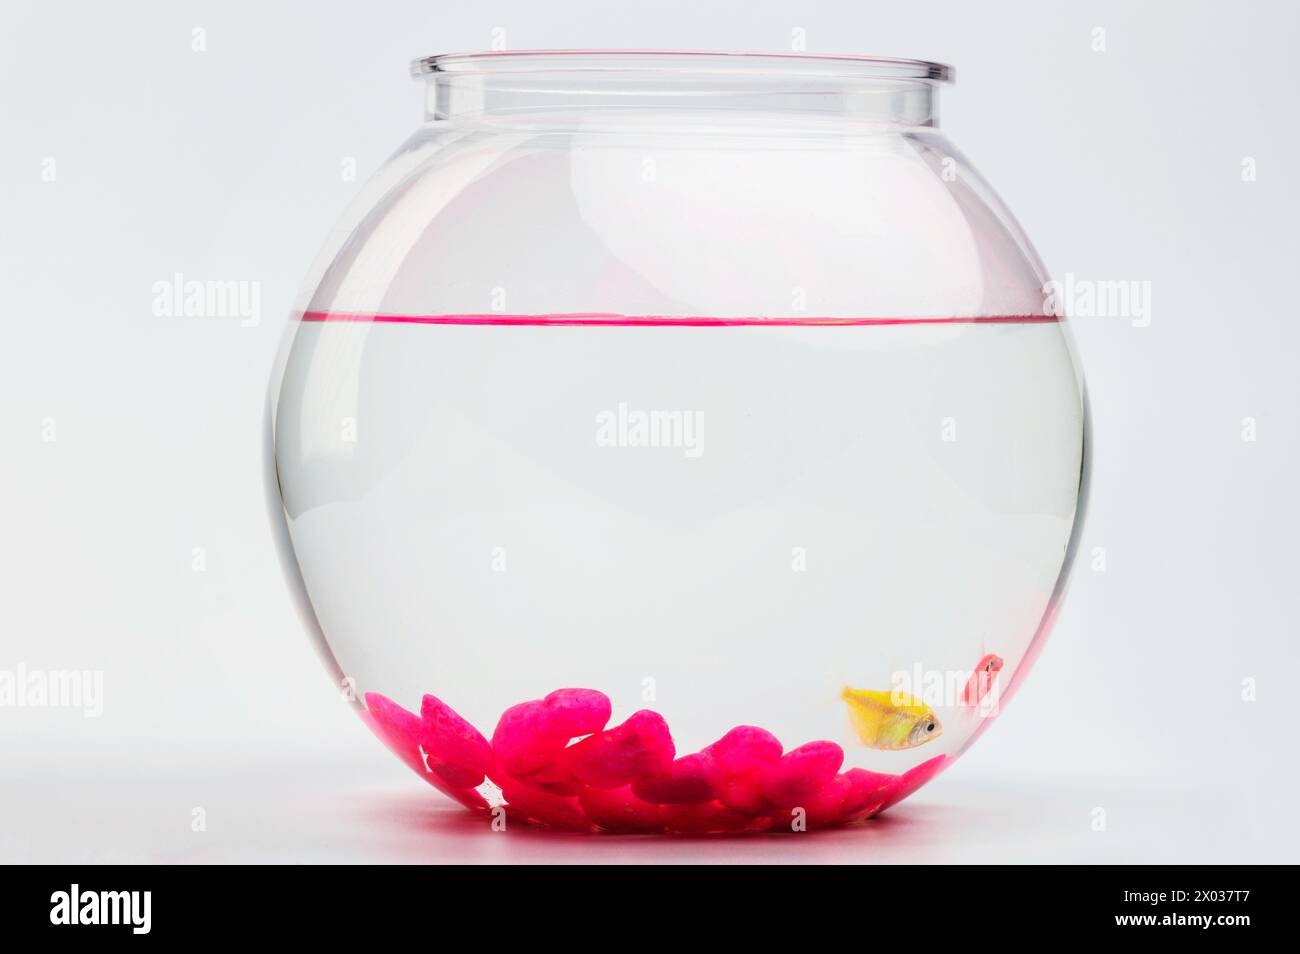 Aquarium bowl with two fishes and pink rocks isolated on white studio background Stock Photo